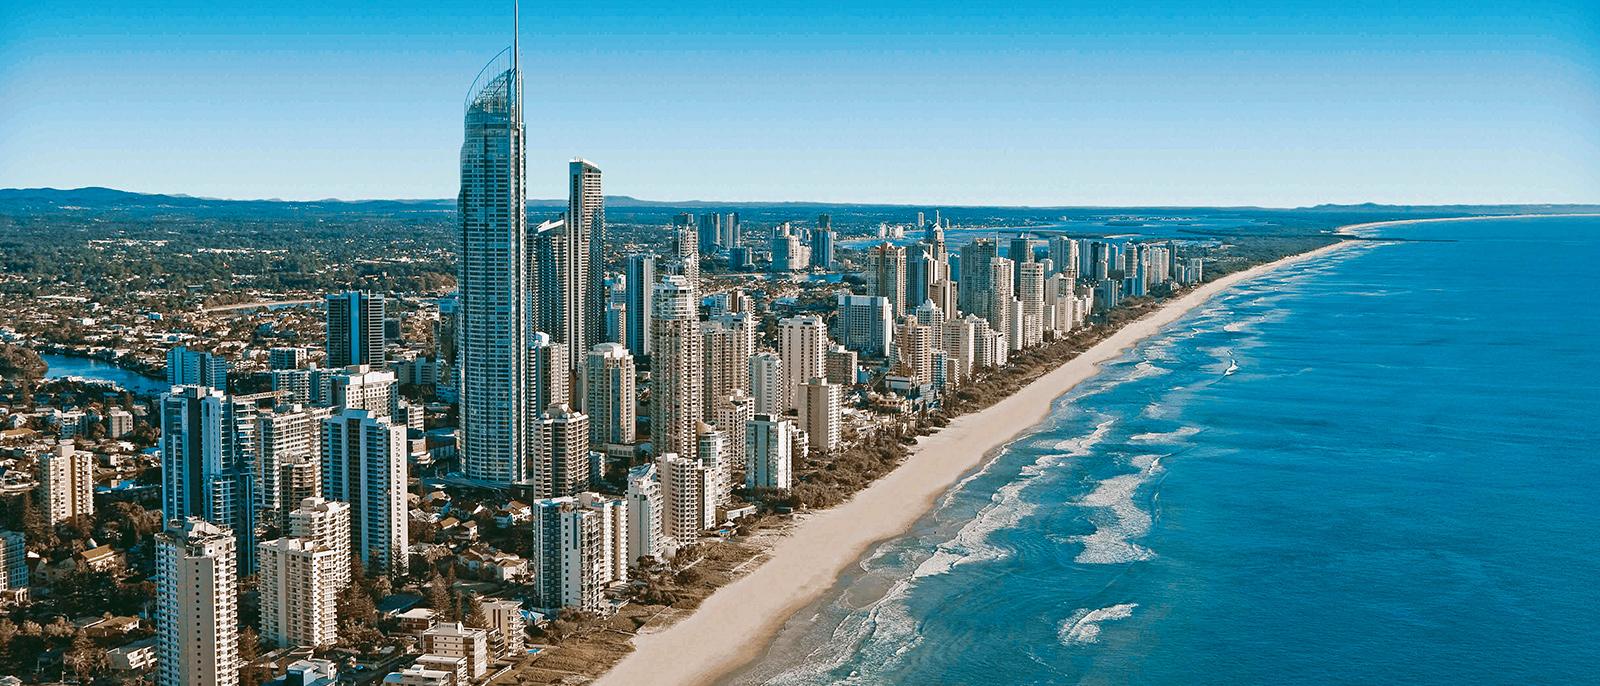 Day Trip From Coolangatta To Surfers Paradise, Australia